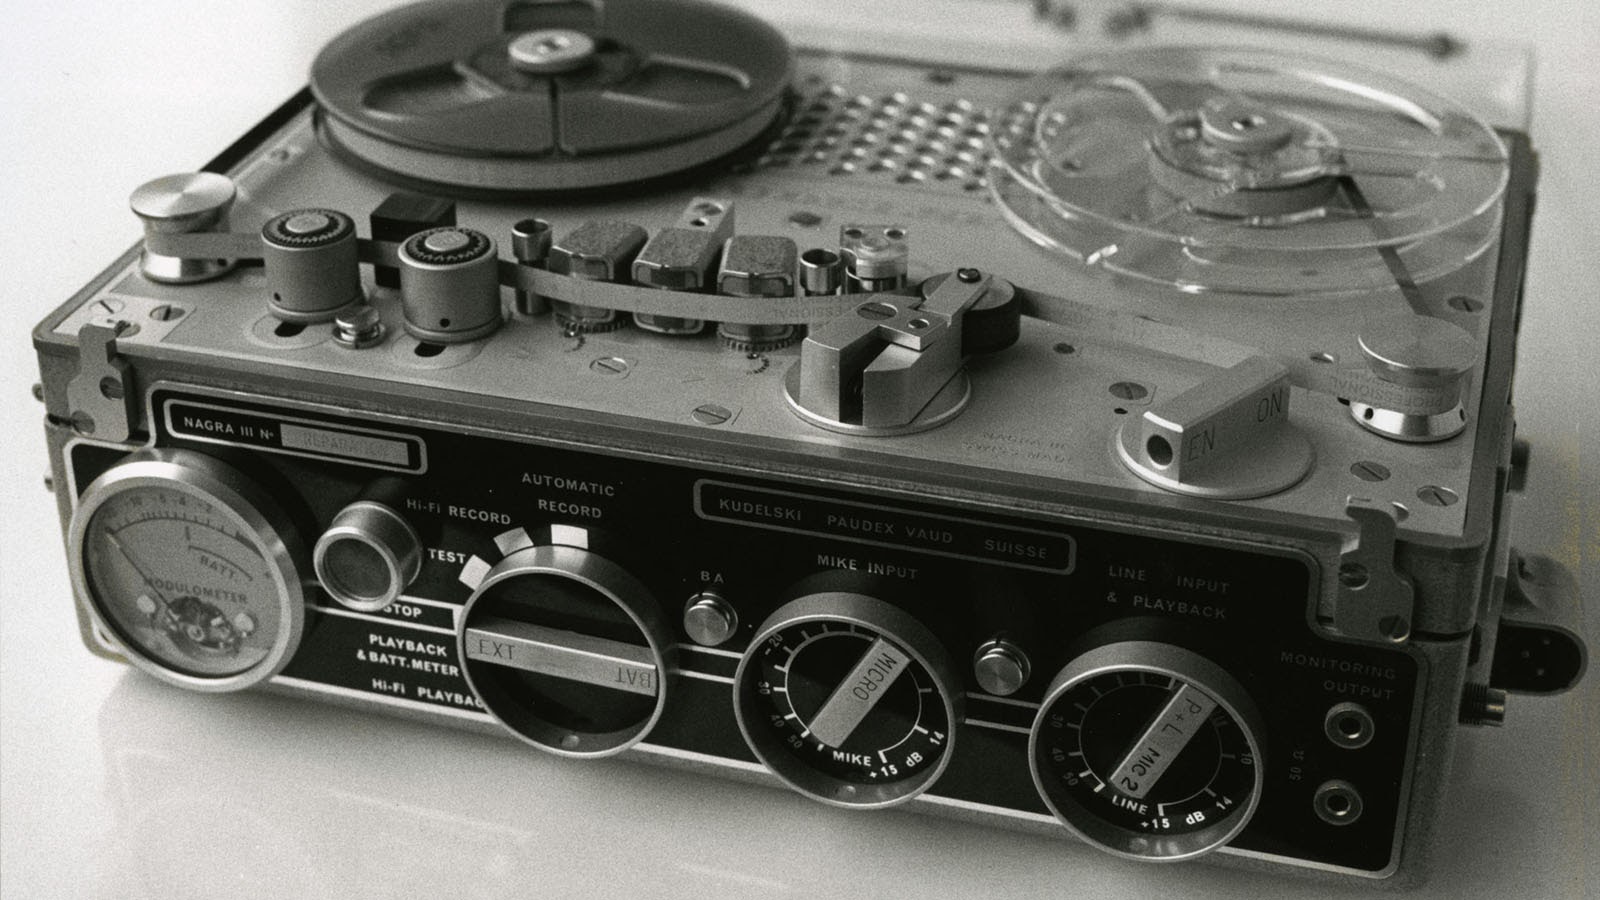 A Nagra Kudelski III similar to the ones used to capture the audio for The Beatles: Get Back. Image courtesy of Nagra Audio.